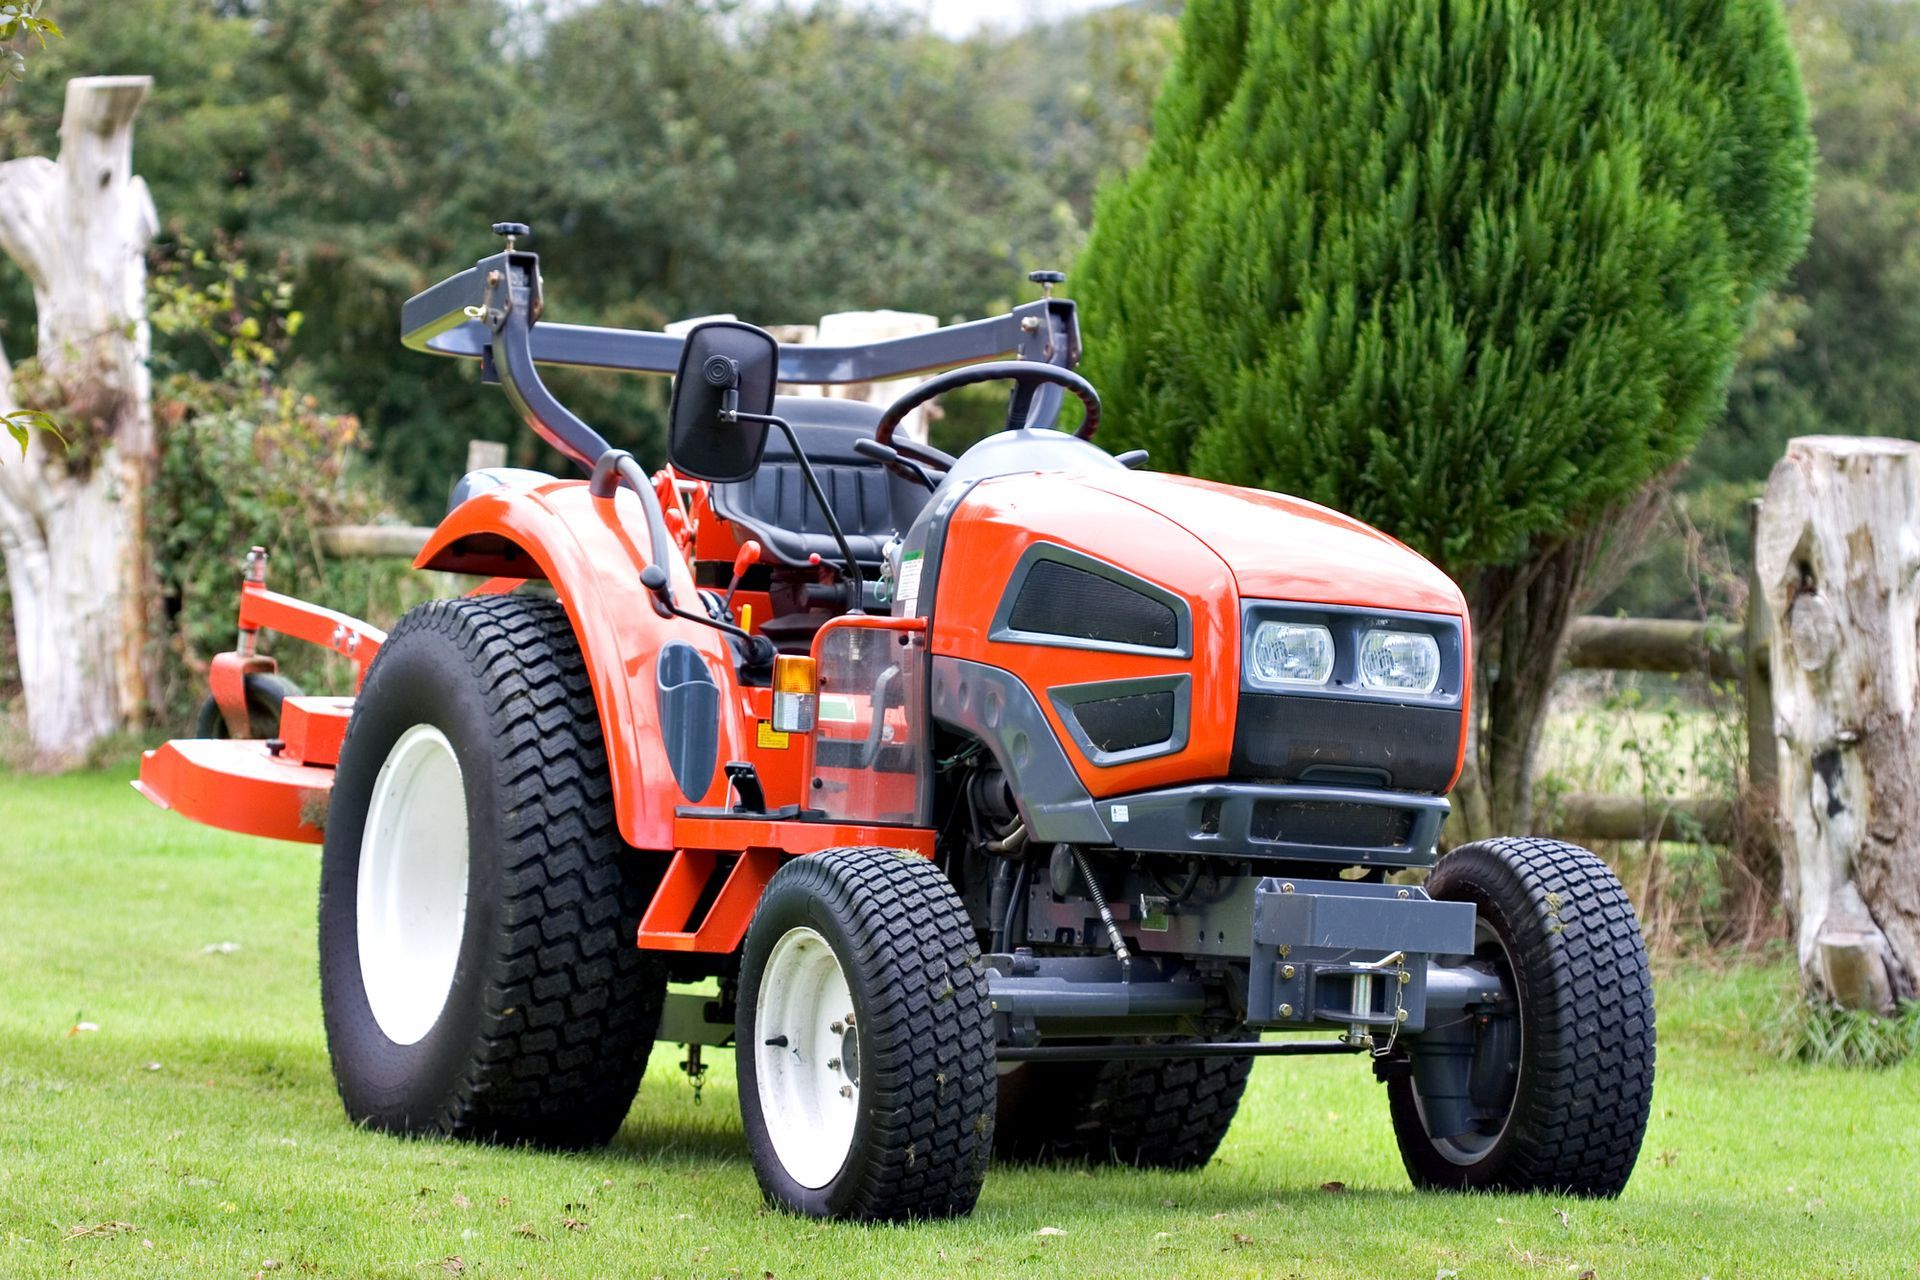 a small orange tractor is parked in a grassy field